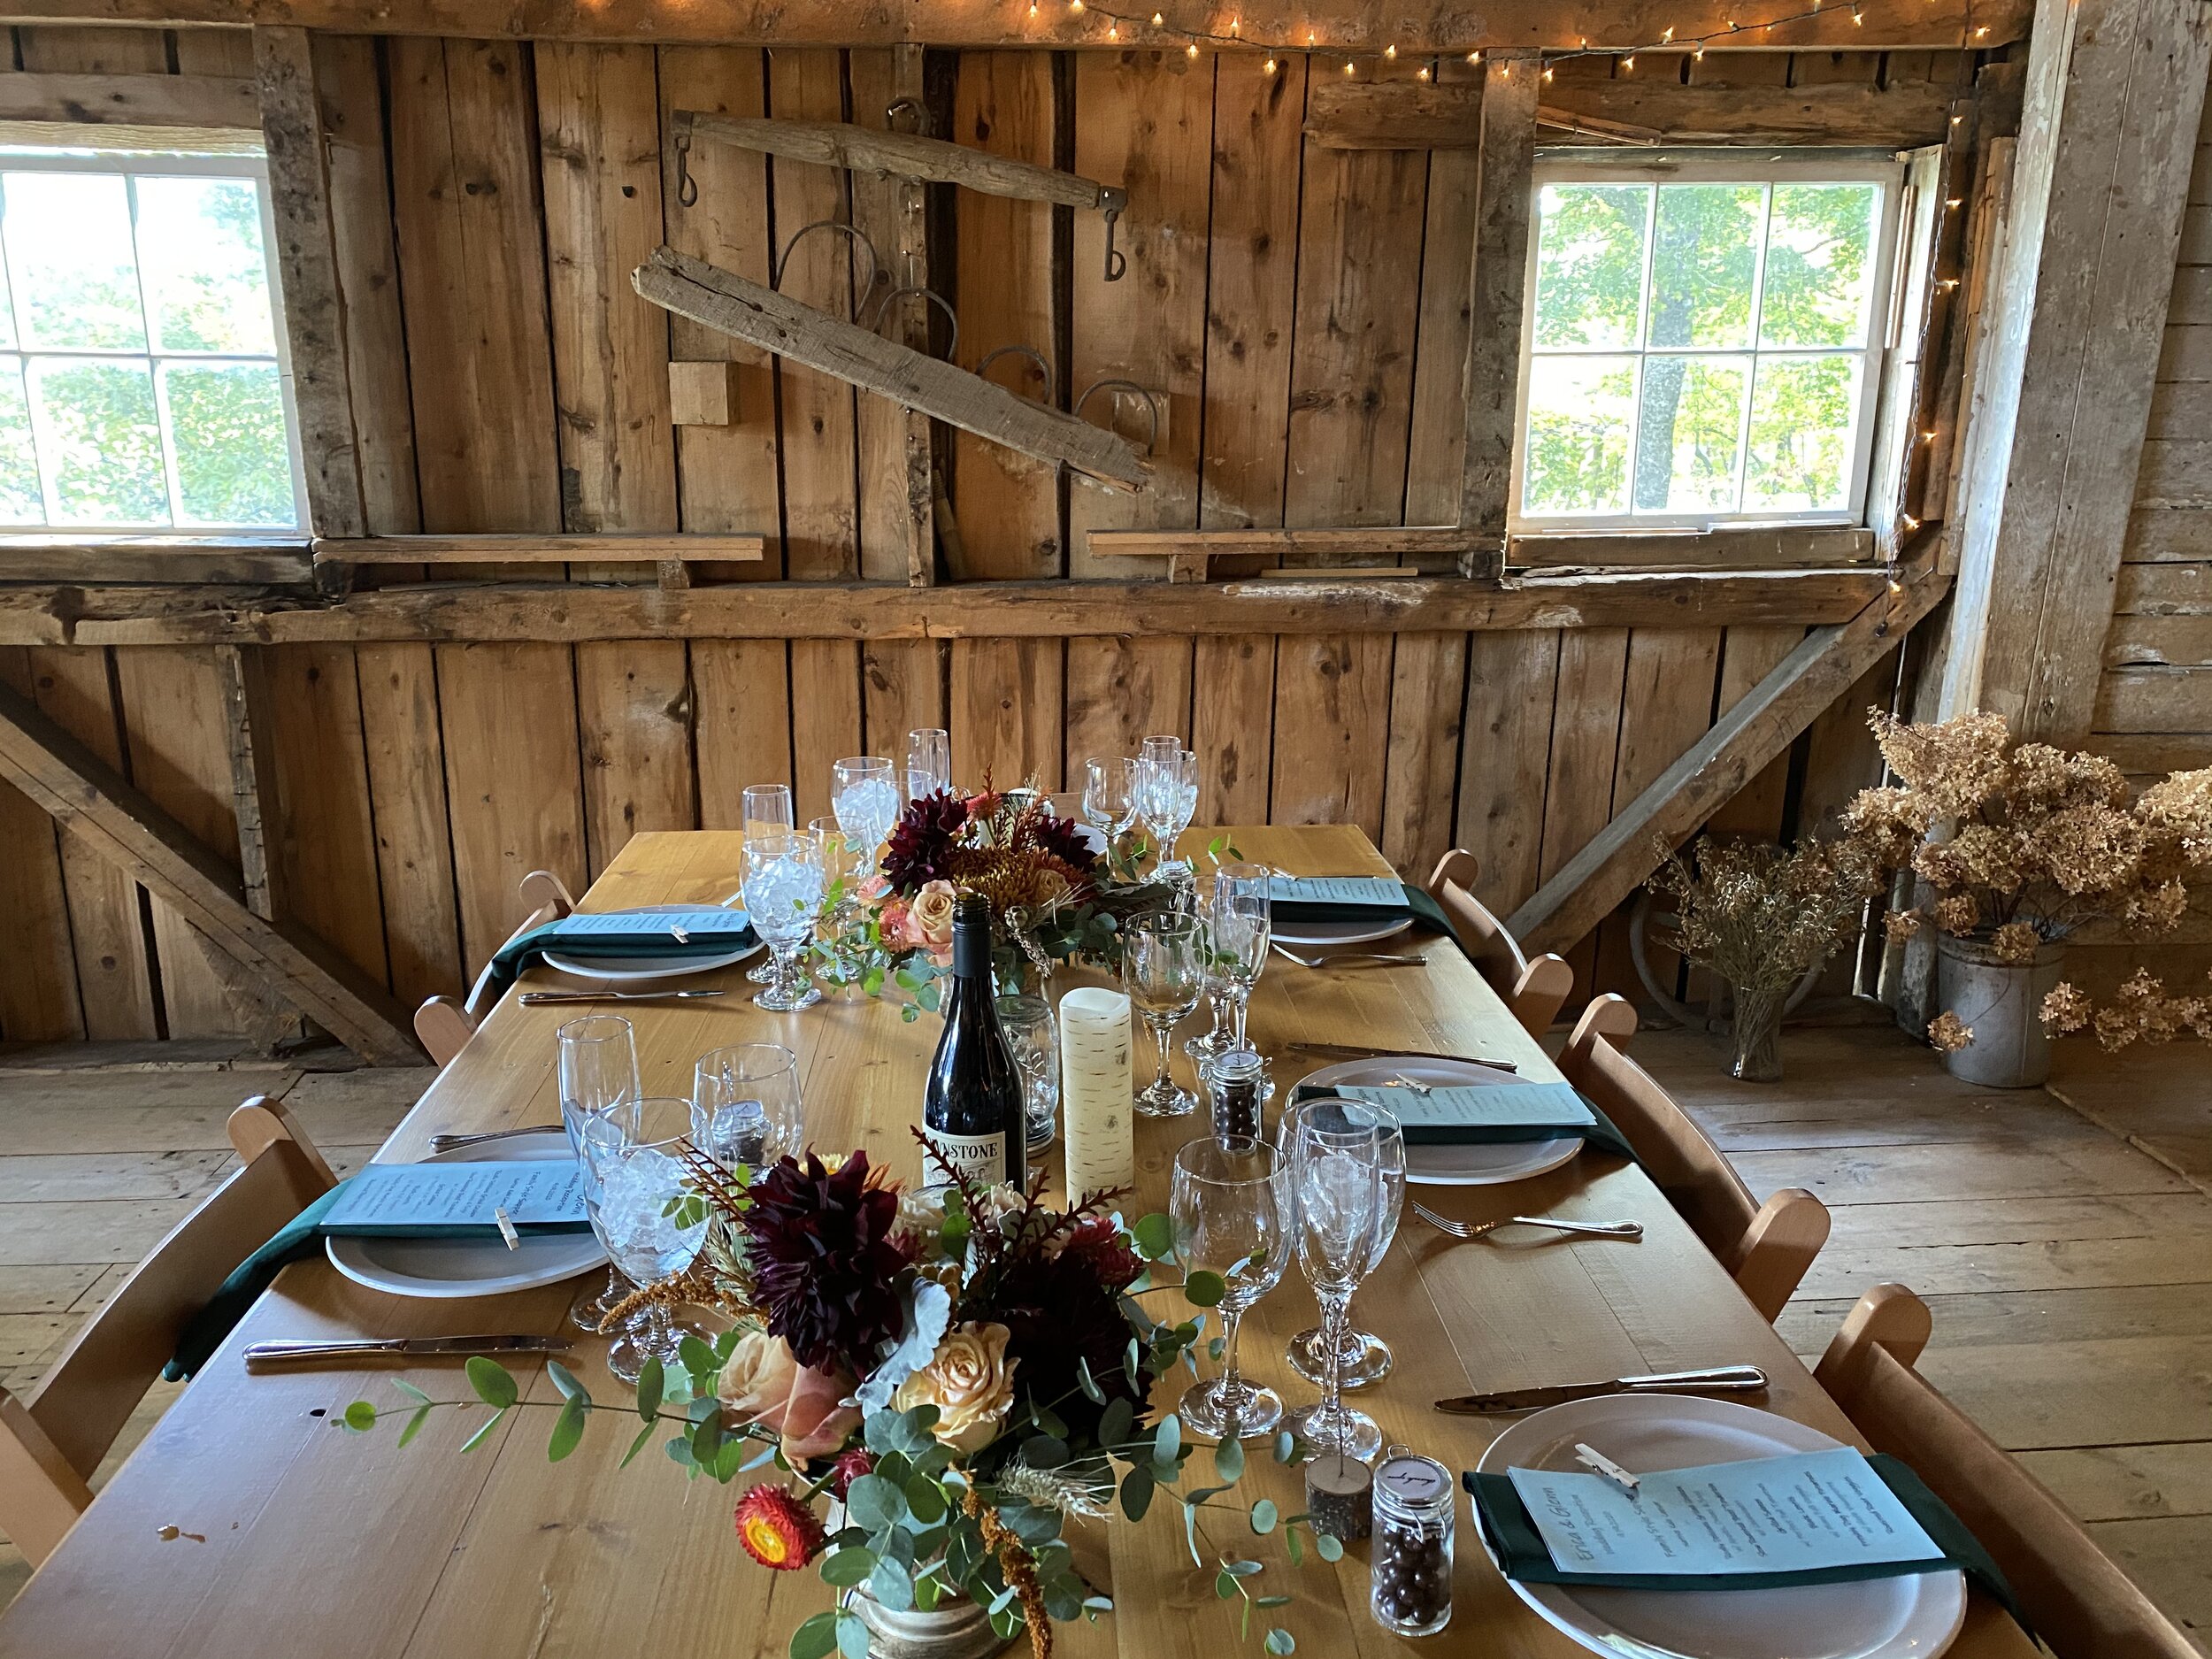 A table set for an intimate dinner in the barn